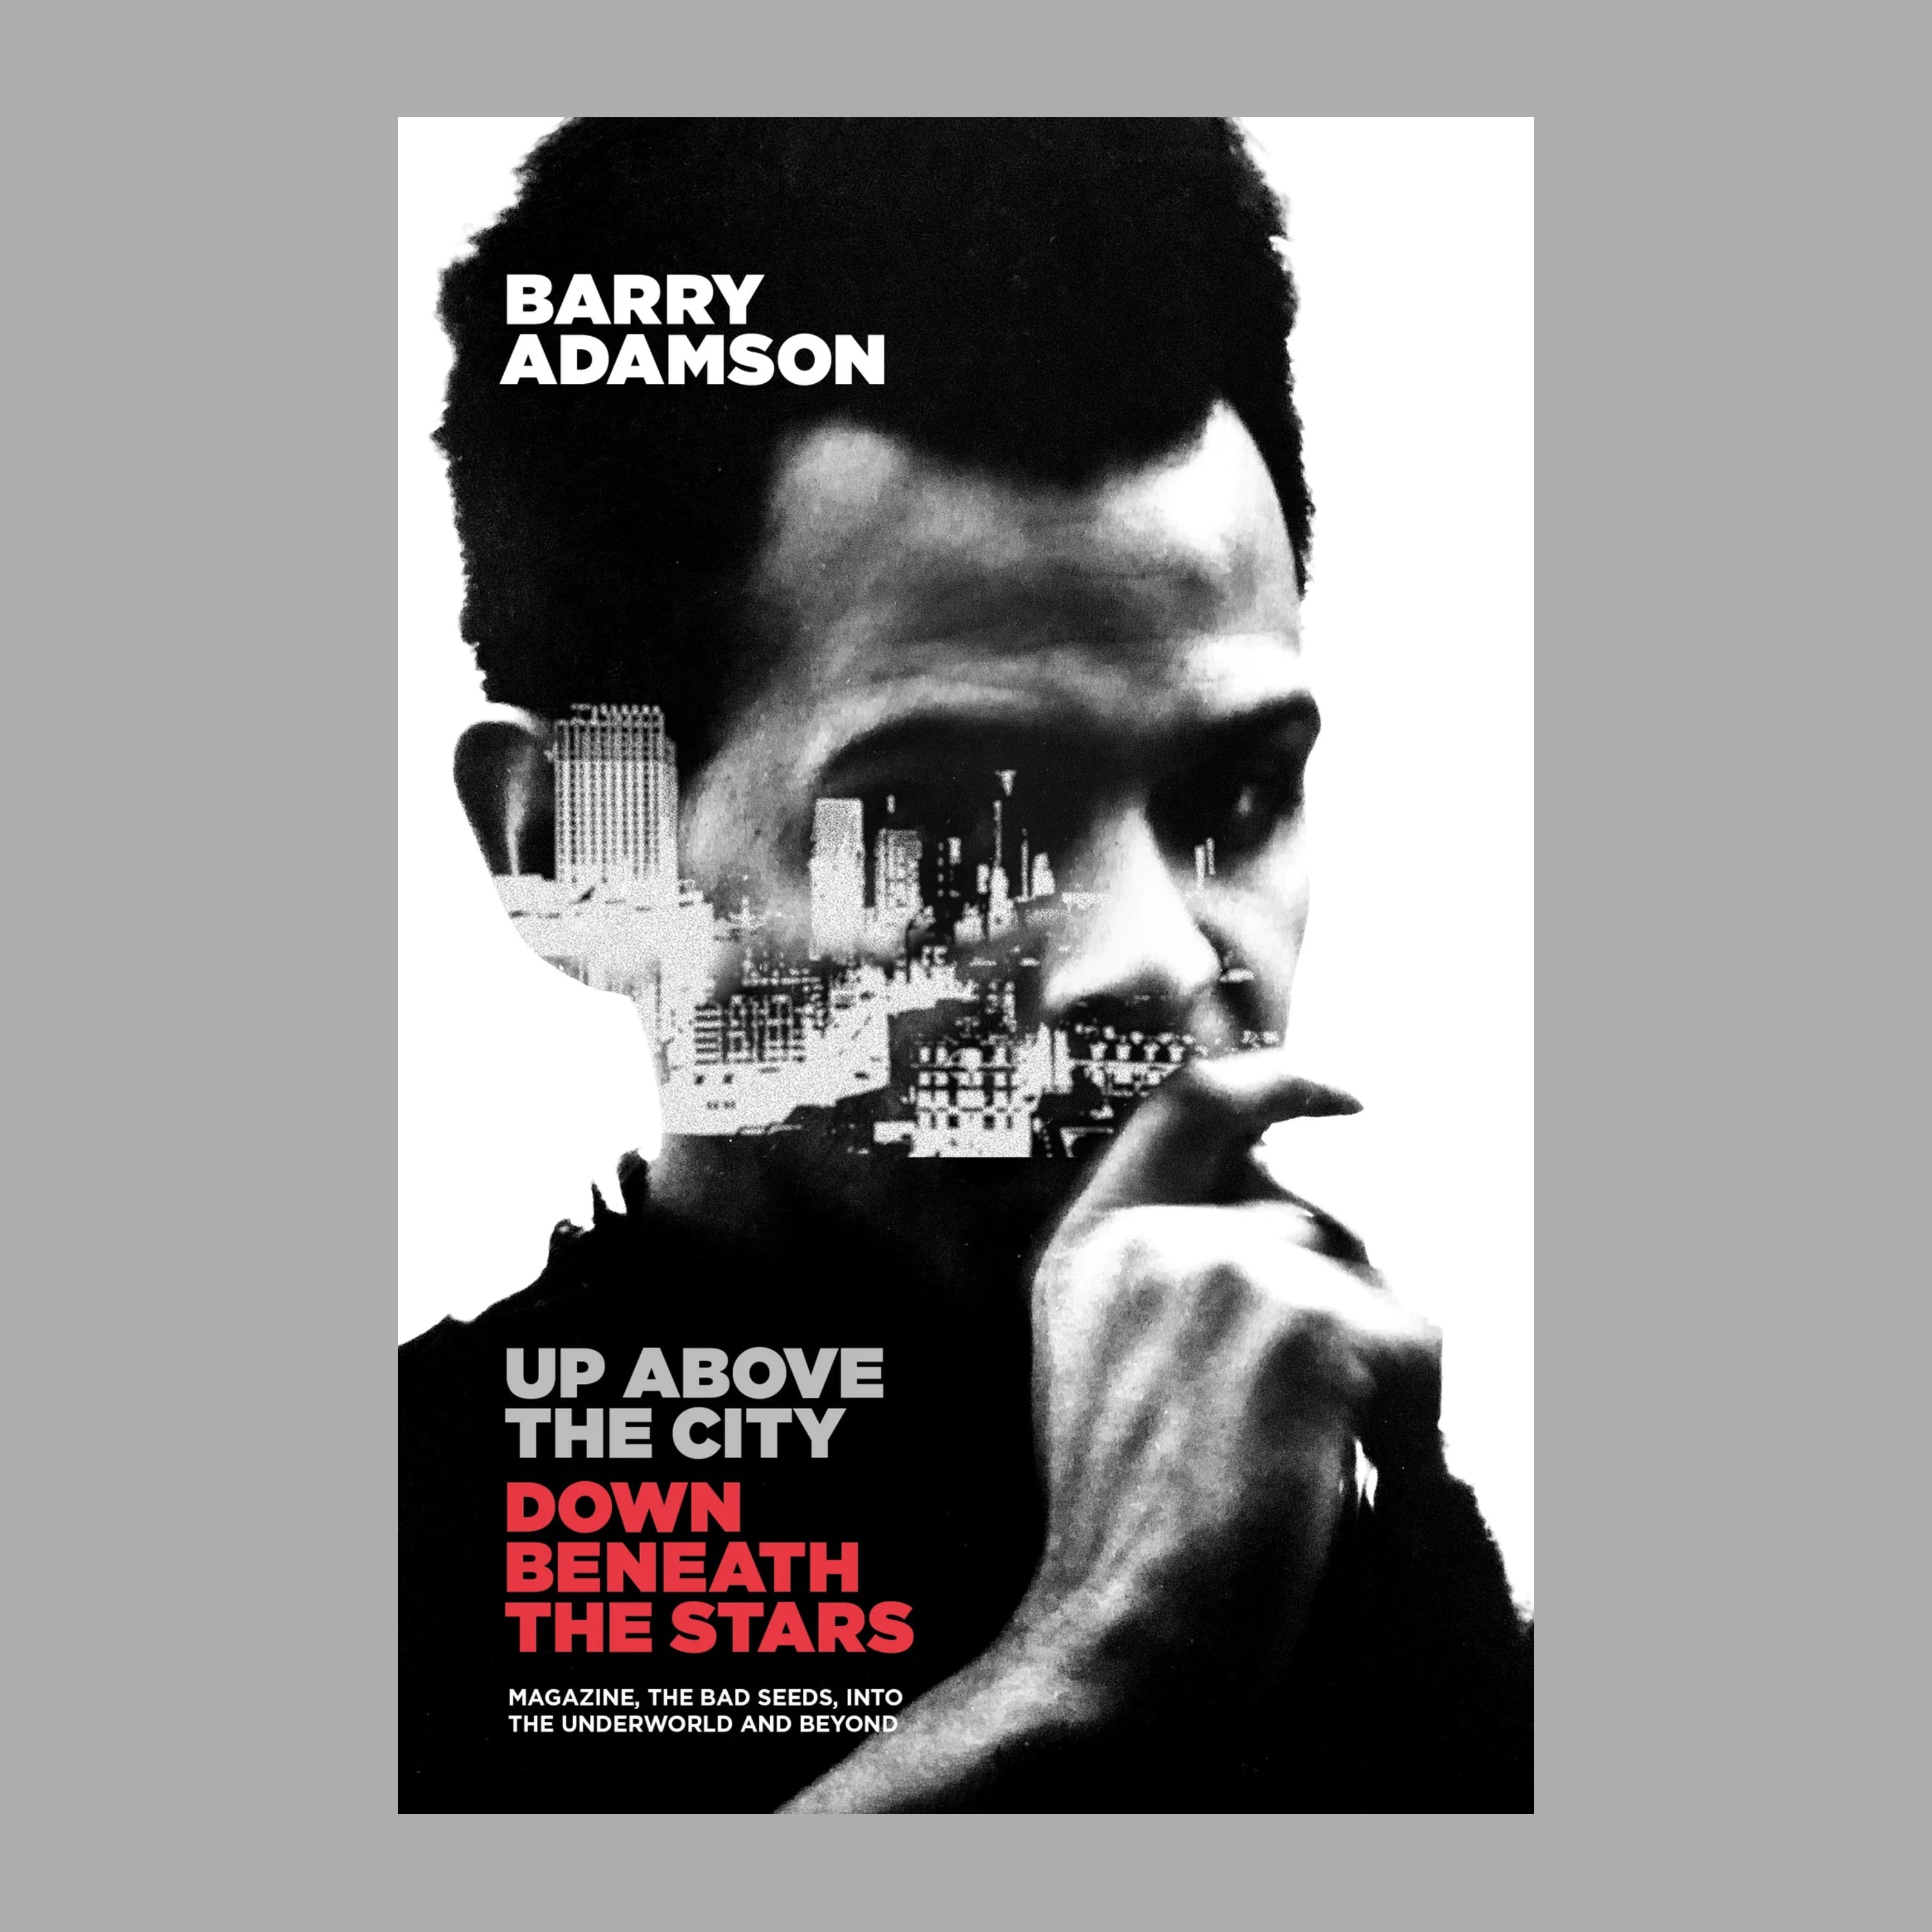 Barry Adamson - Up Above the City, Down Beneath the Stars: Magazine, the Bad Seeds, into the Underworld and Beyond: Signed Hardback Book